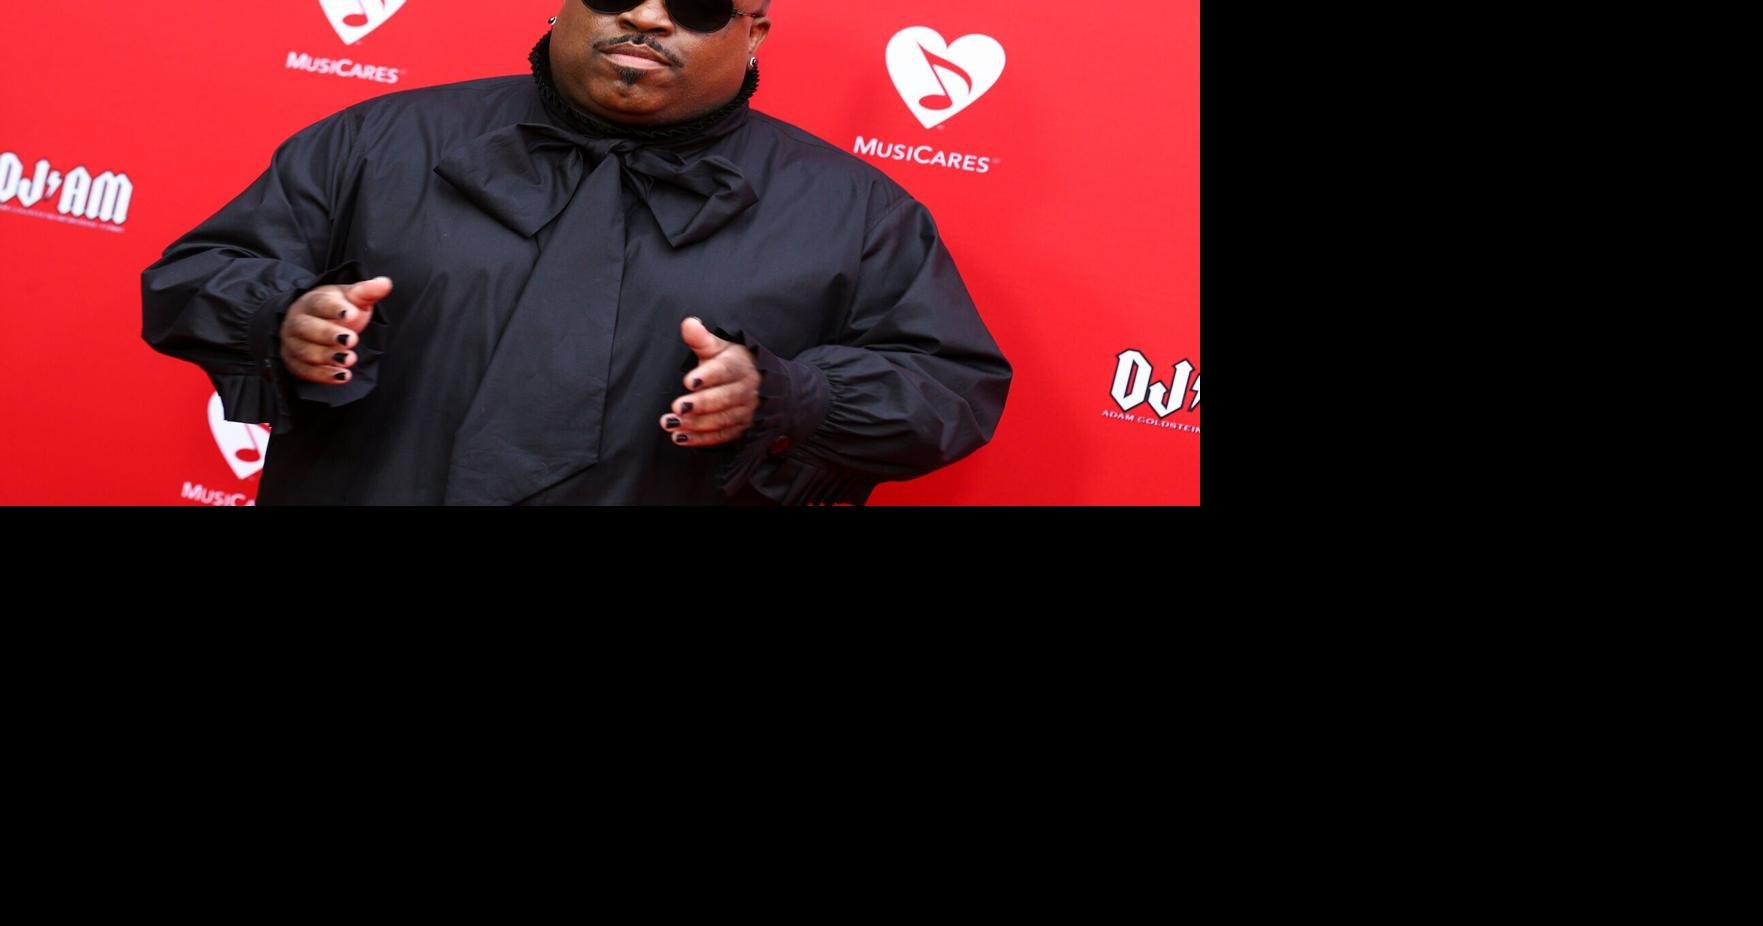 Cee Lo Green: May - Image 1 from Celebrity Birthdays: Happy